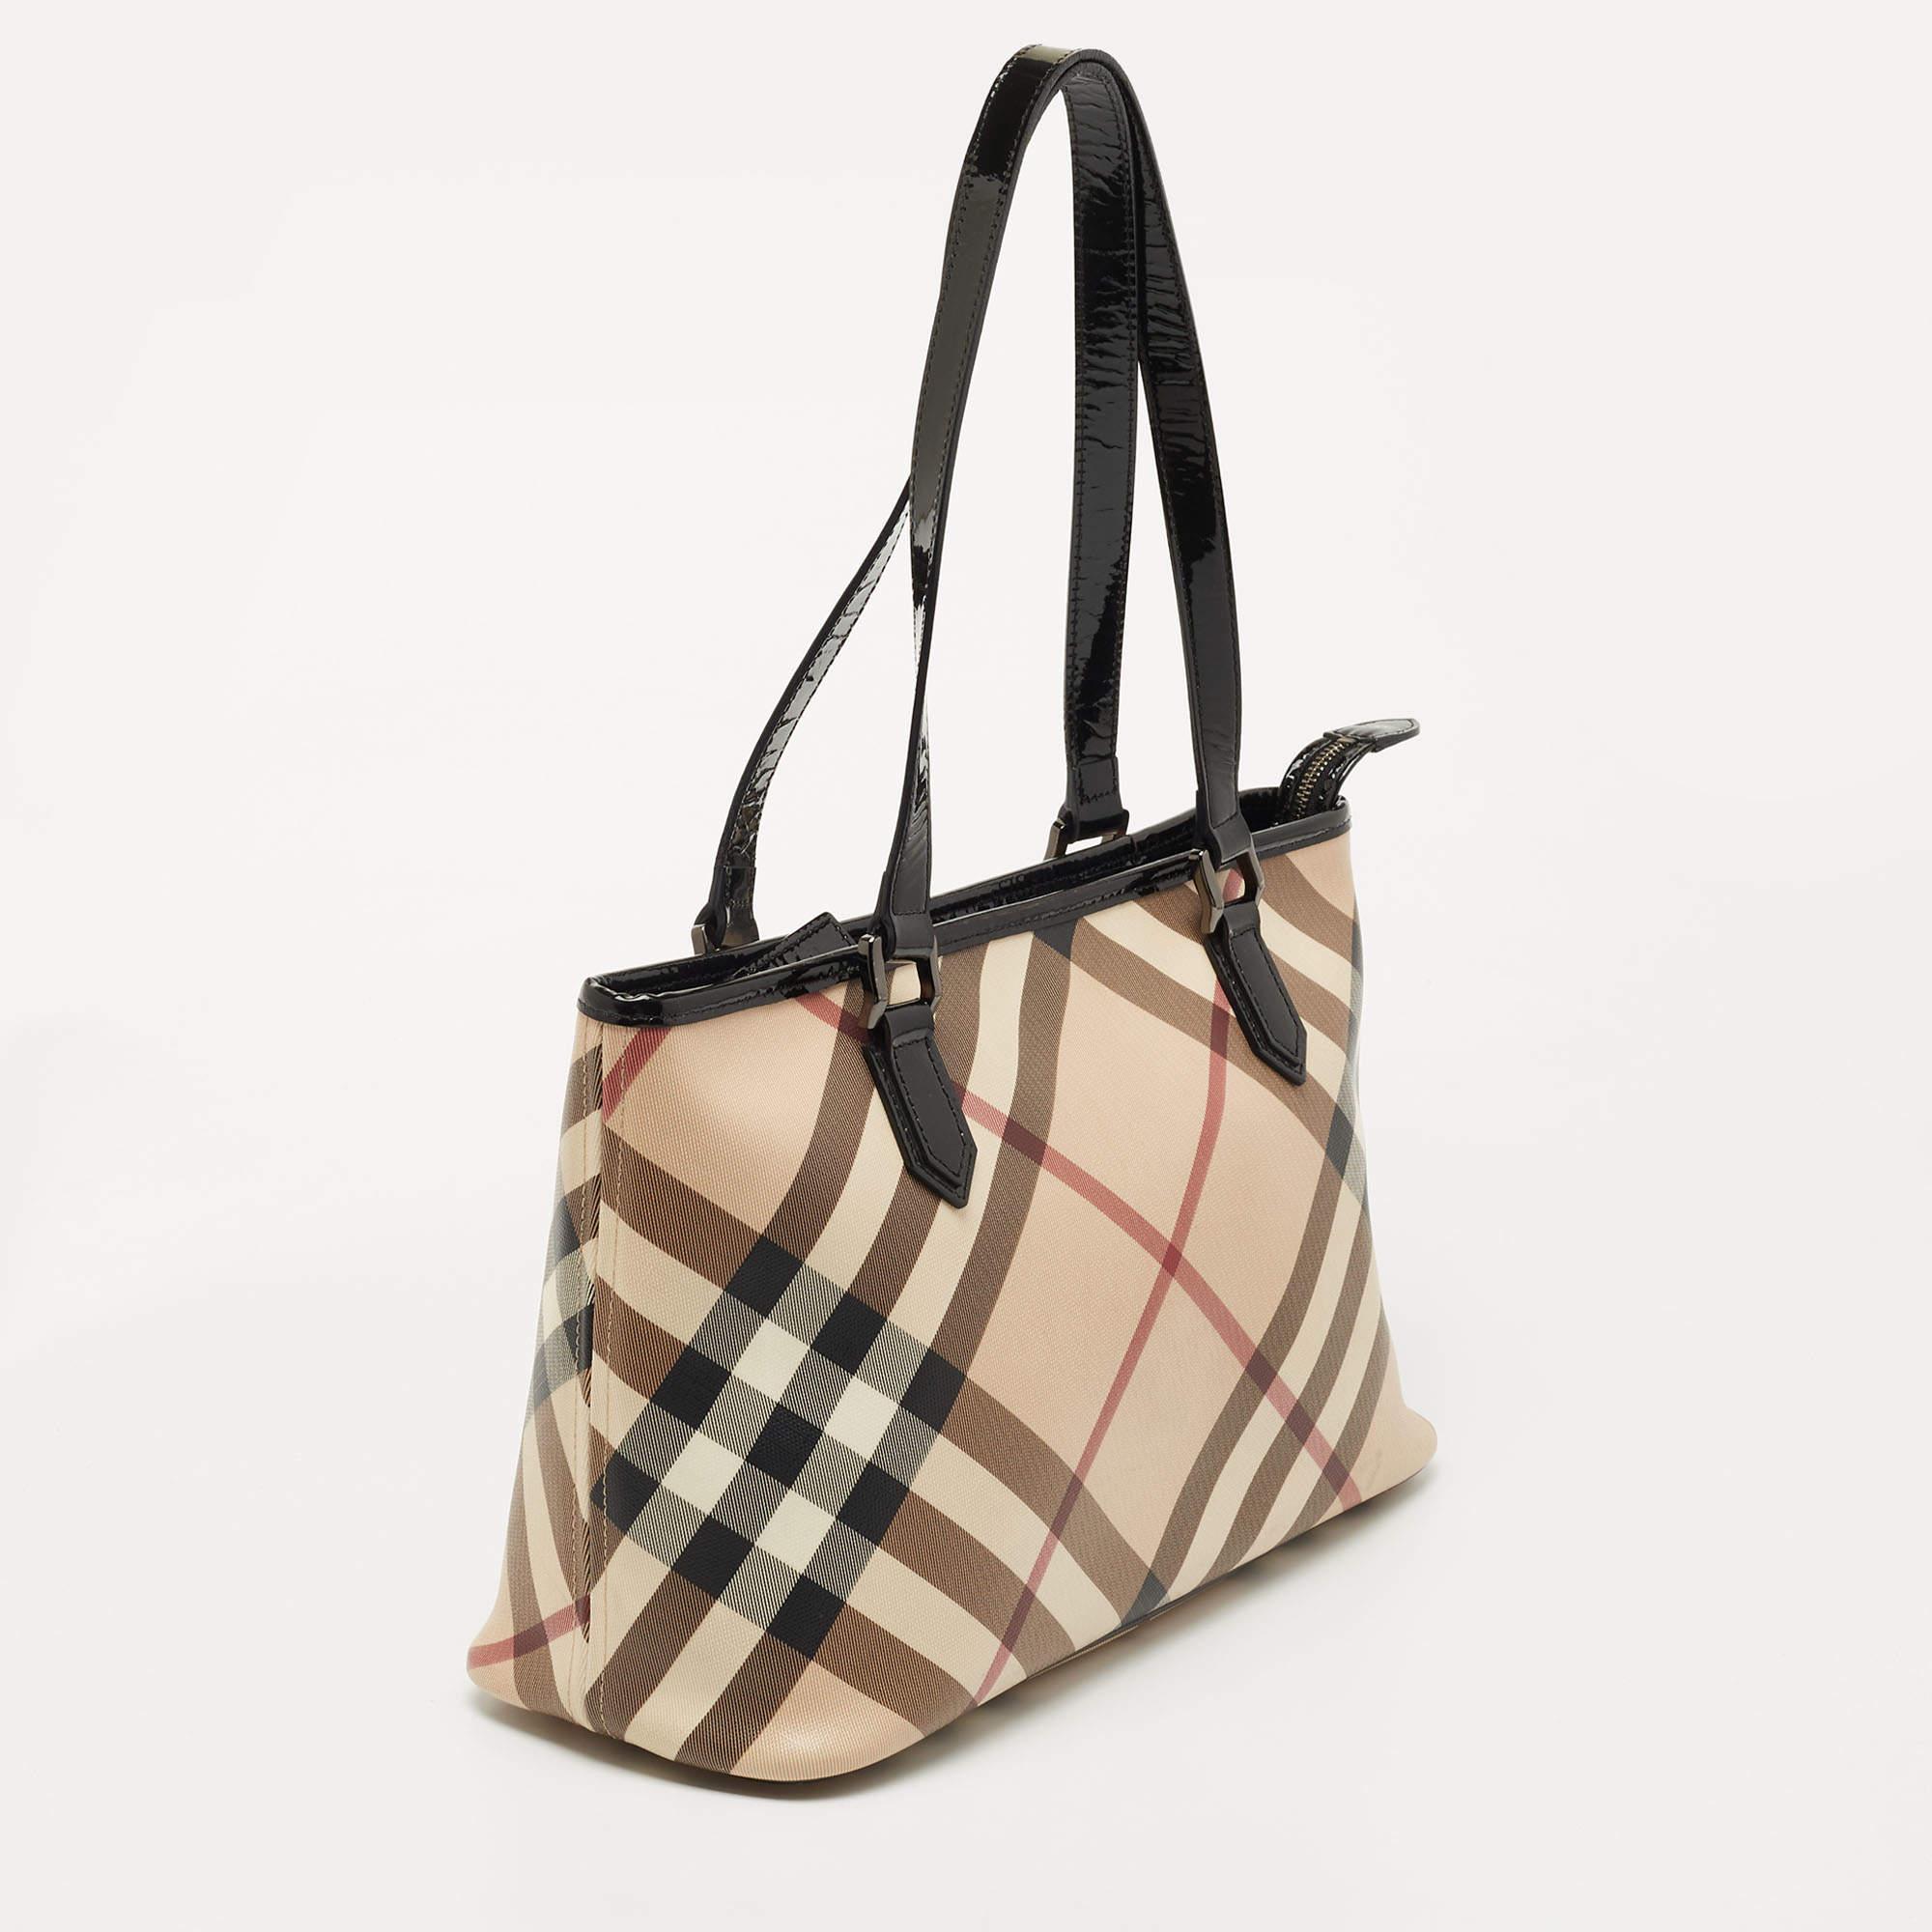 Women's Burberry Black/Beige Nova Check Coated Canvas and Patent Leather Top Zip Tote